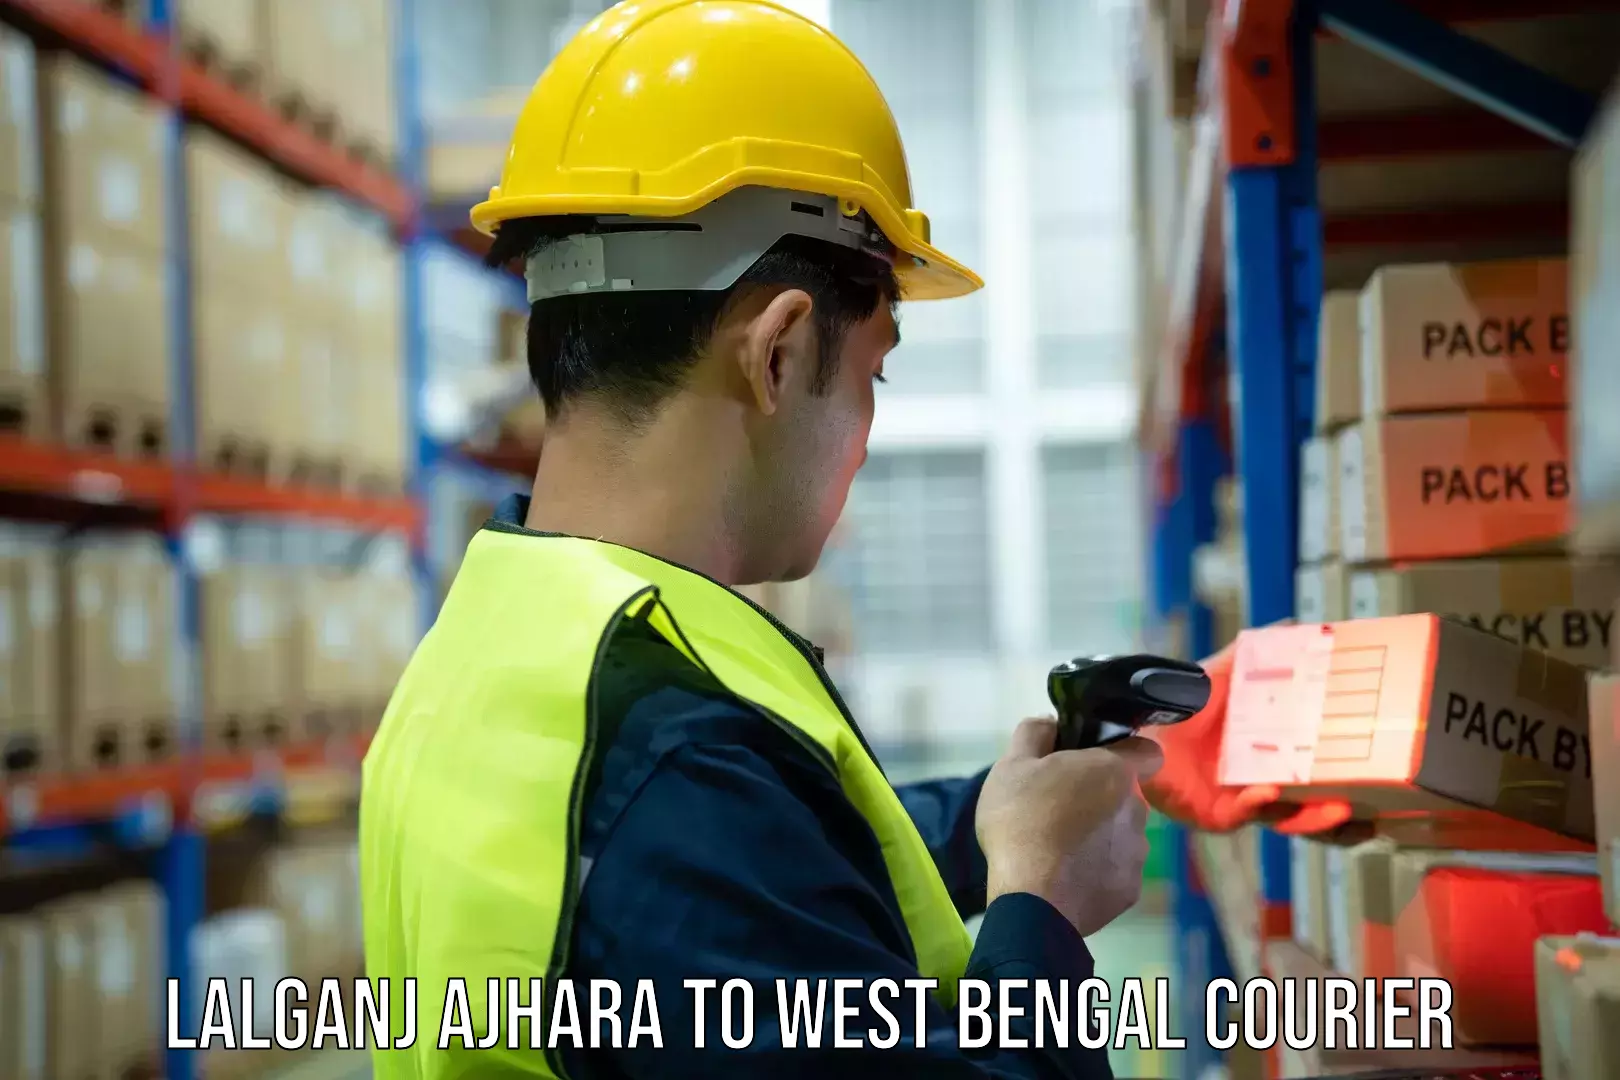 Courier service innovation Lalganj Ajhara to West Bengal